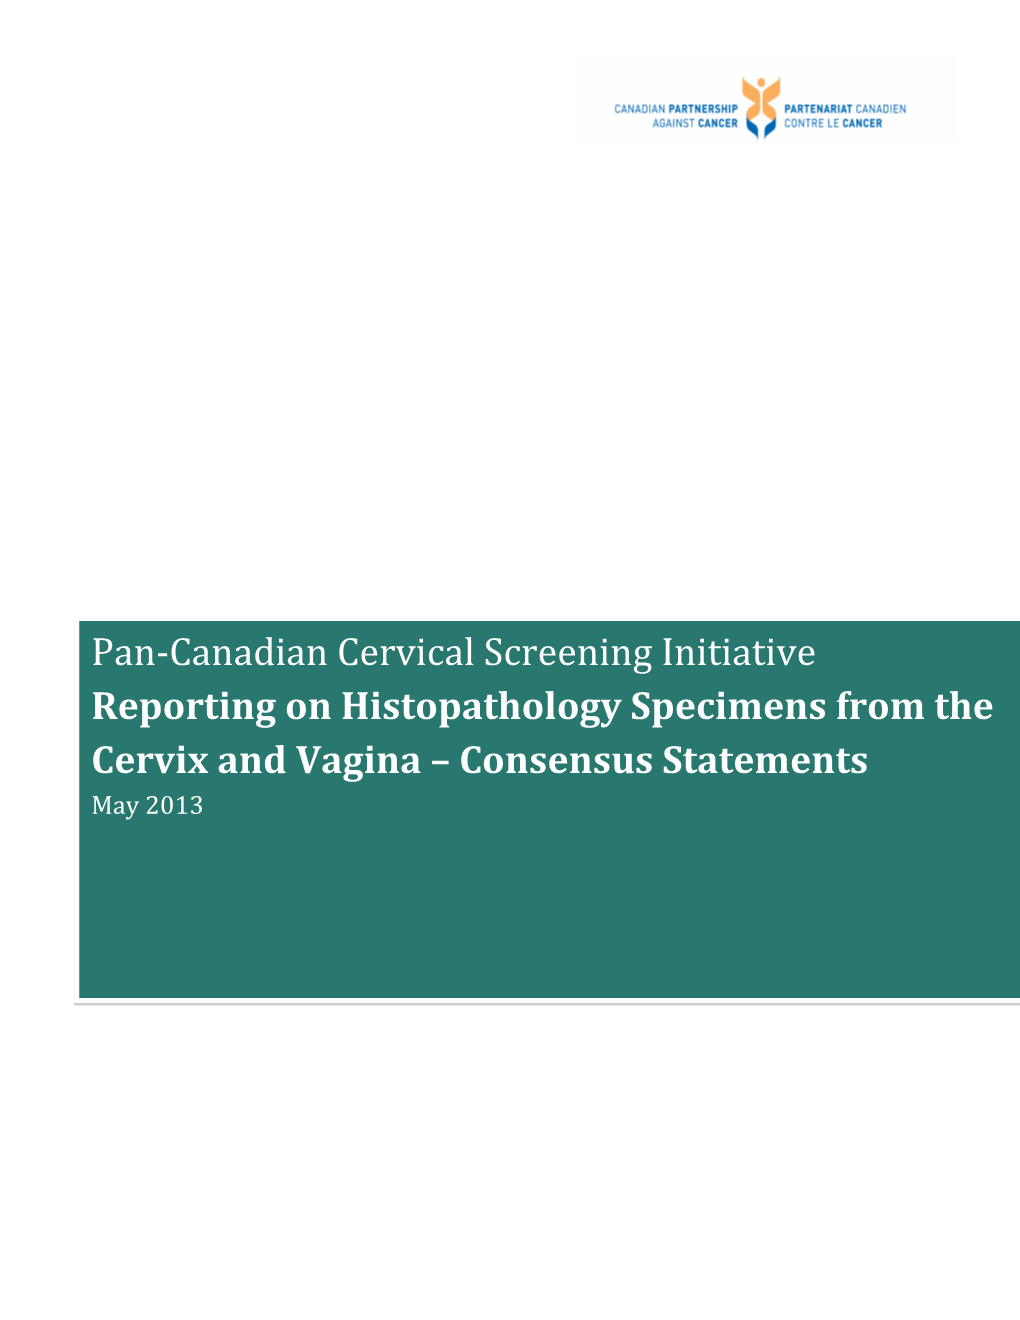 Reporting on Histopathology Specimens from the Cervix and Vagina – Consensus Statements May 2013